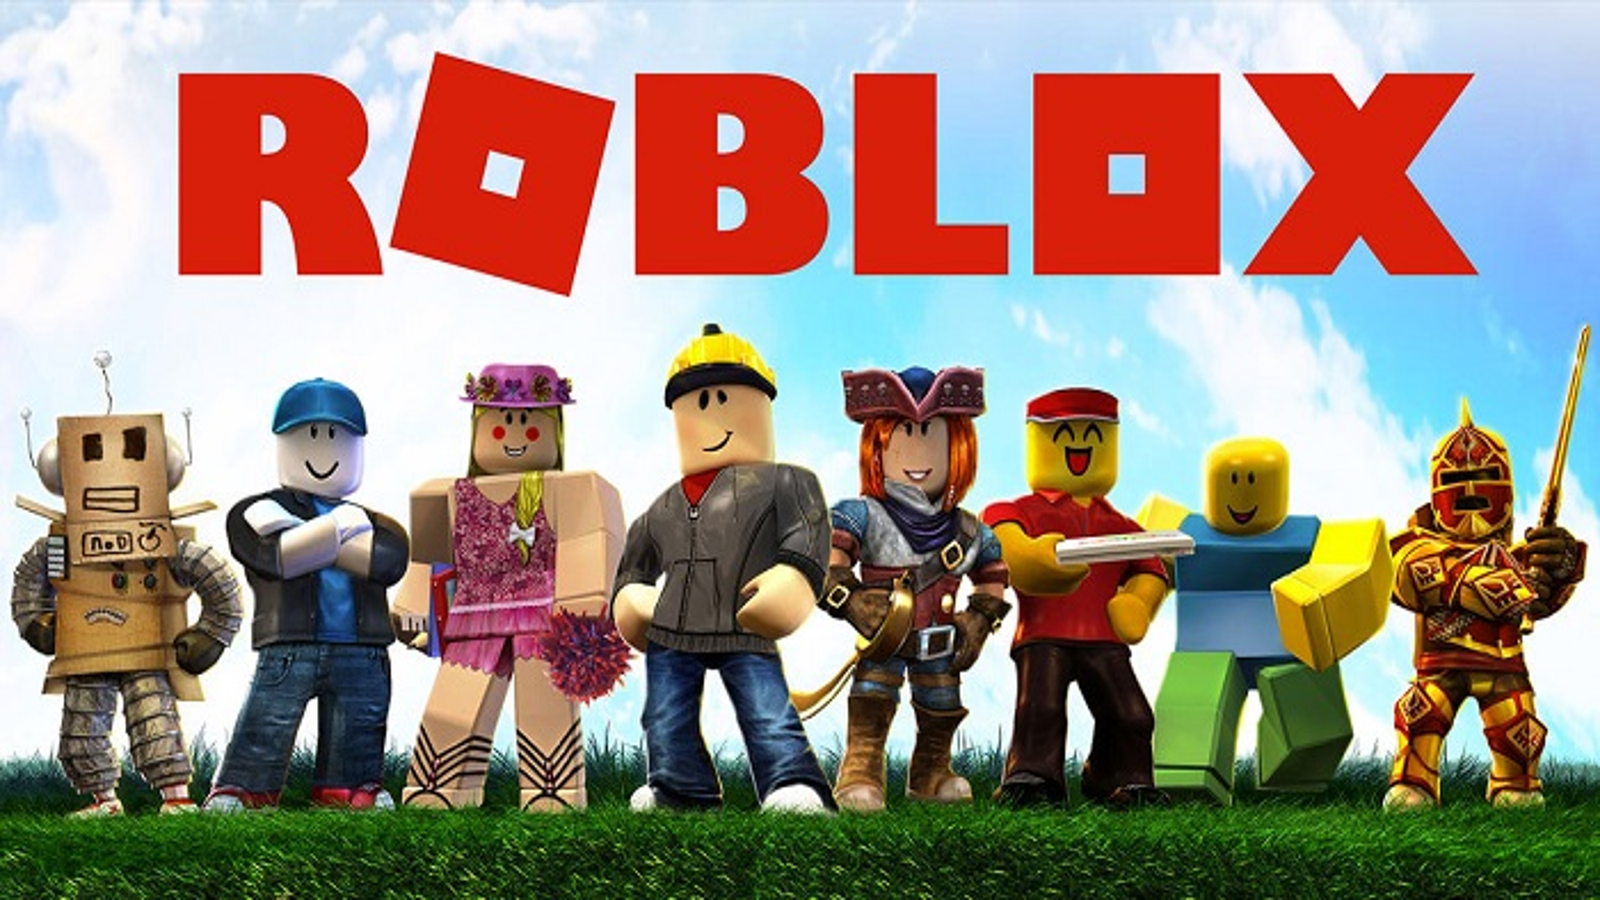 Roblox Corporation global net loss as of Q2 2023 